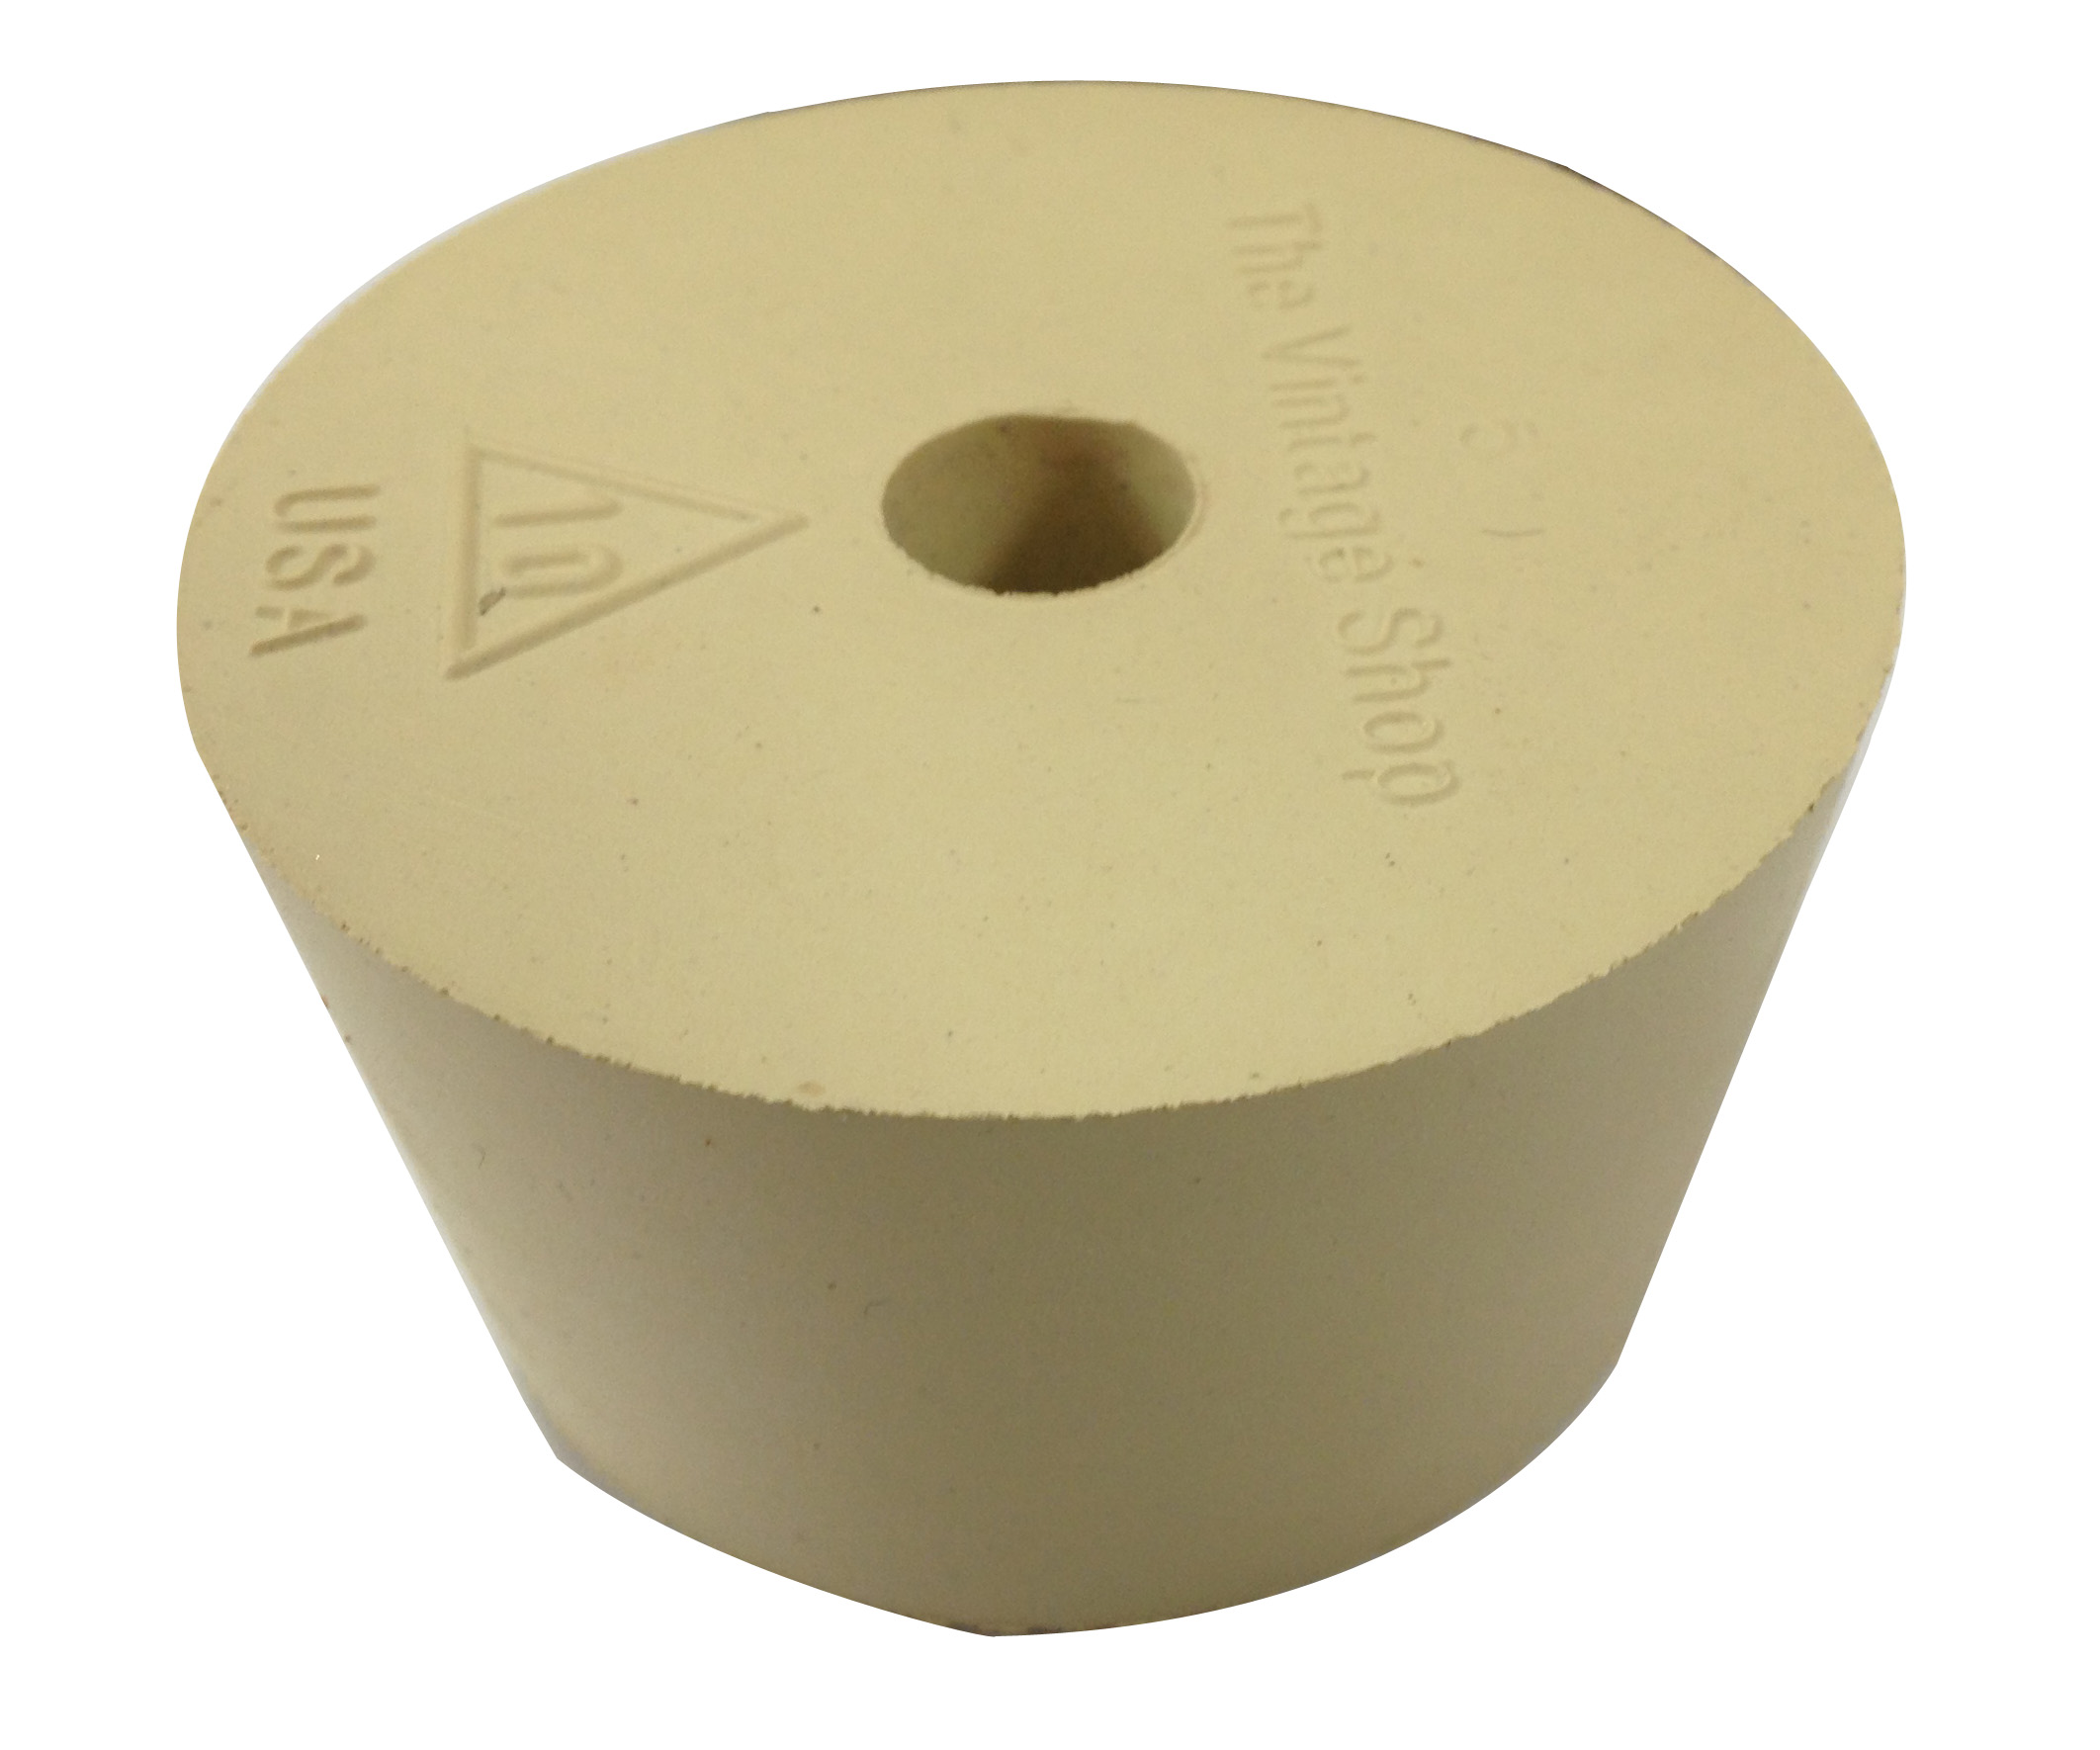 Rubber stopper, #10 w/airlock hole (for plastic carboy) UBREW4U